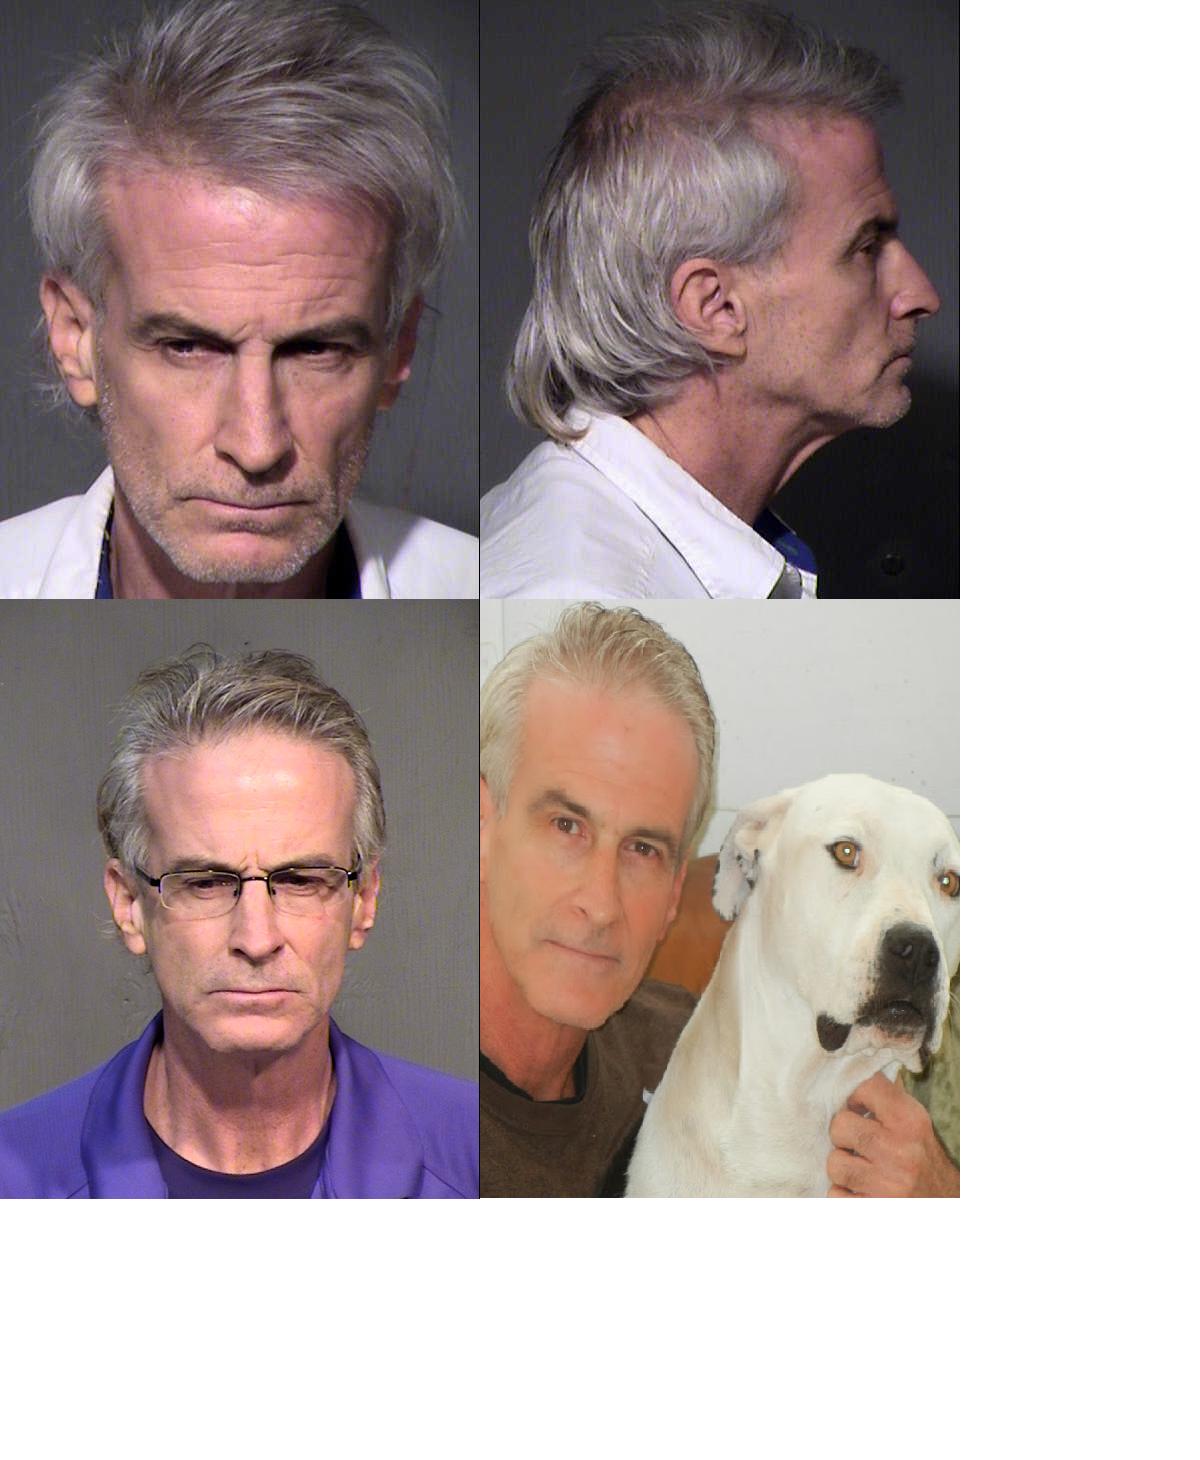 Mug Shots and Other Advertising Images of Bruce Michael Lincis aka "Bruce Dempsey" aka "Bruce Bentley"